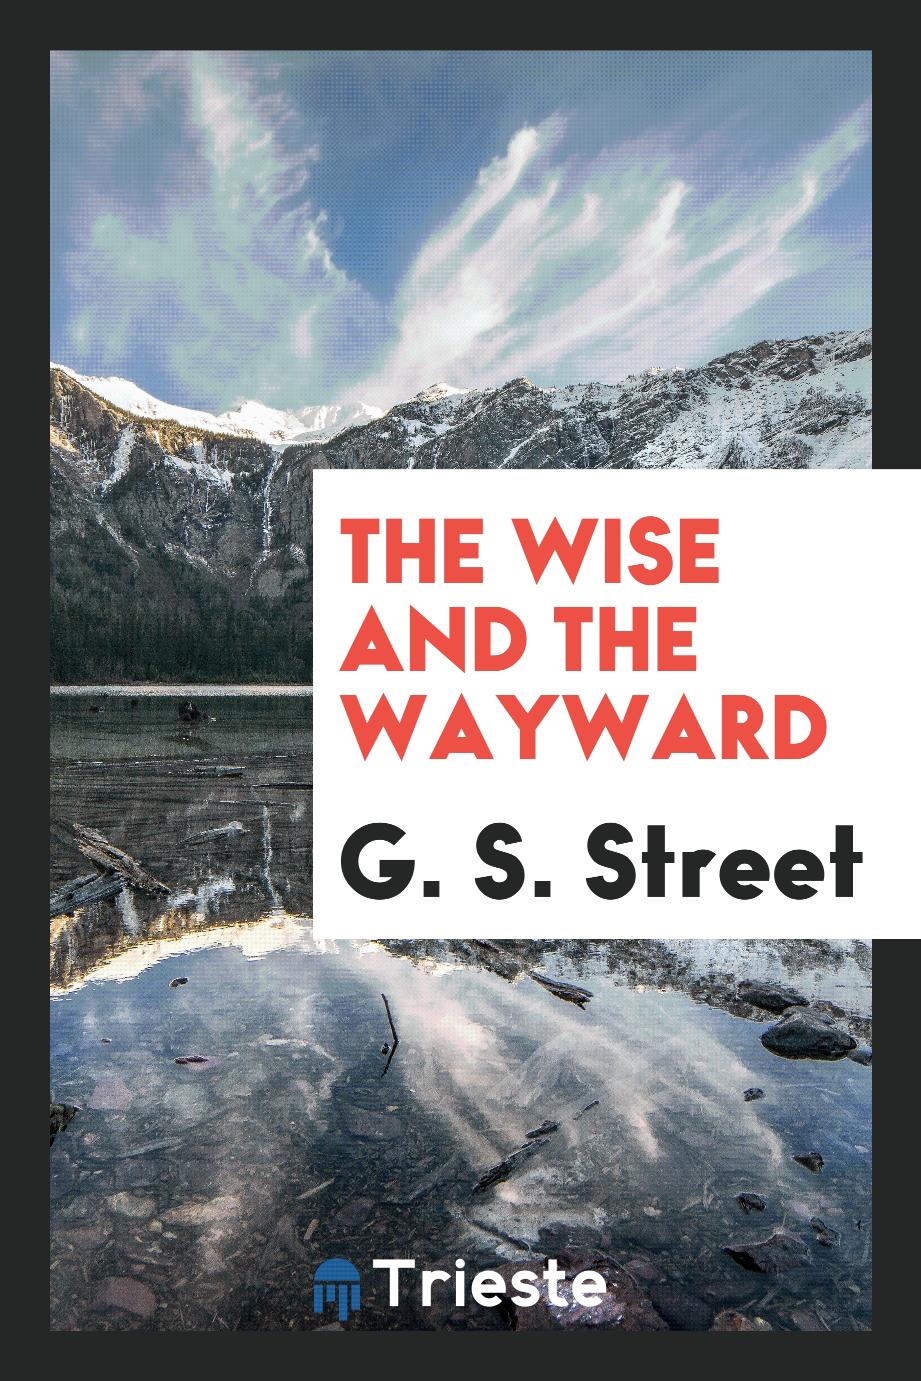 The wise and the wayward